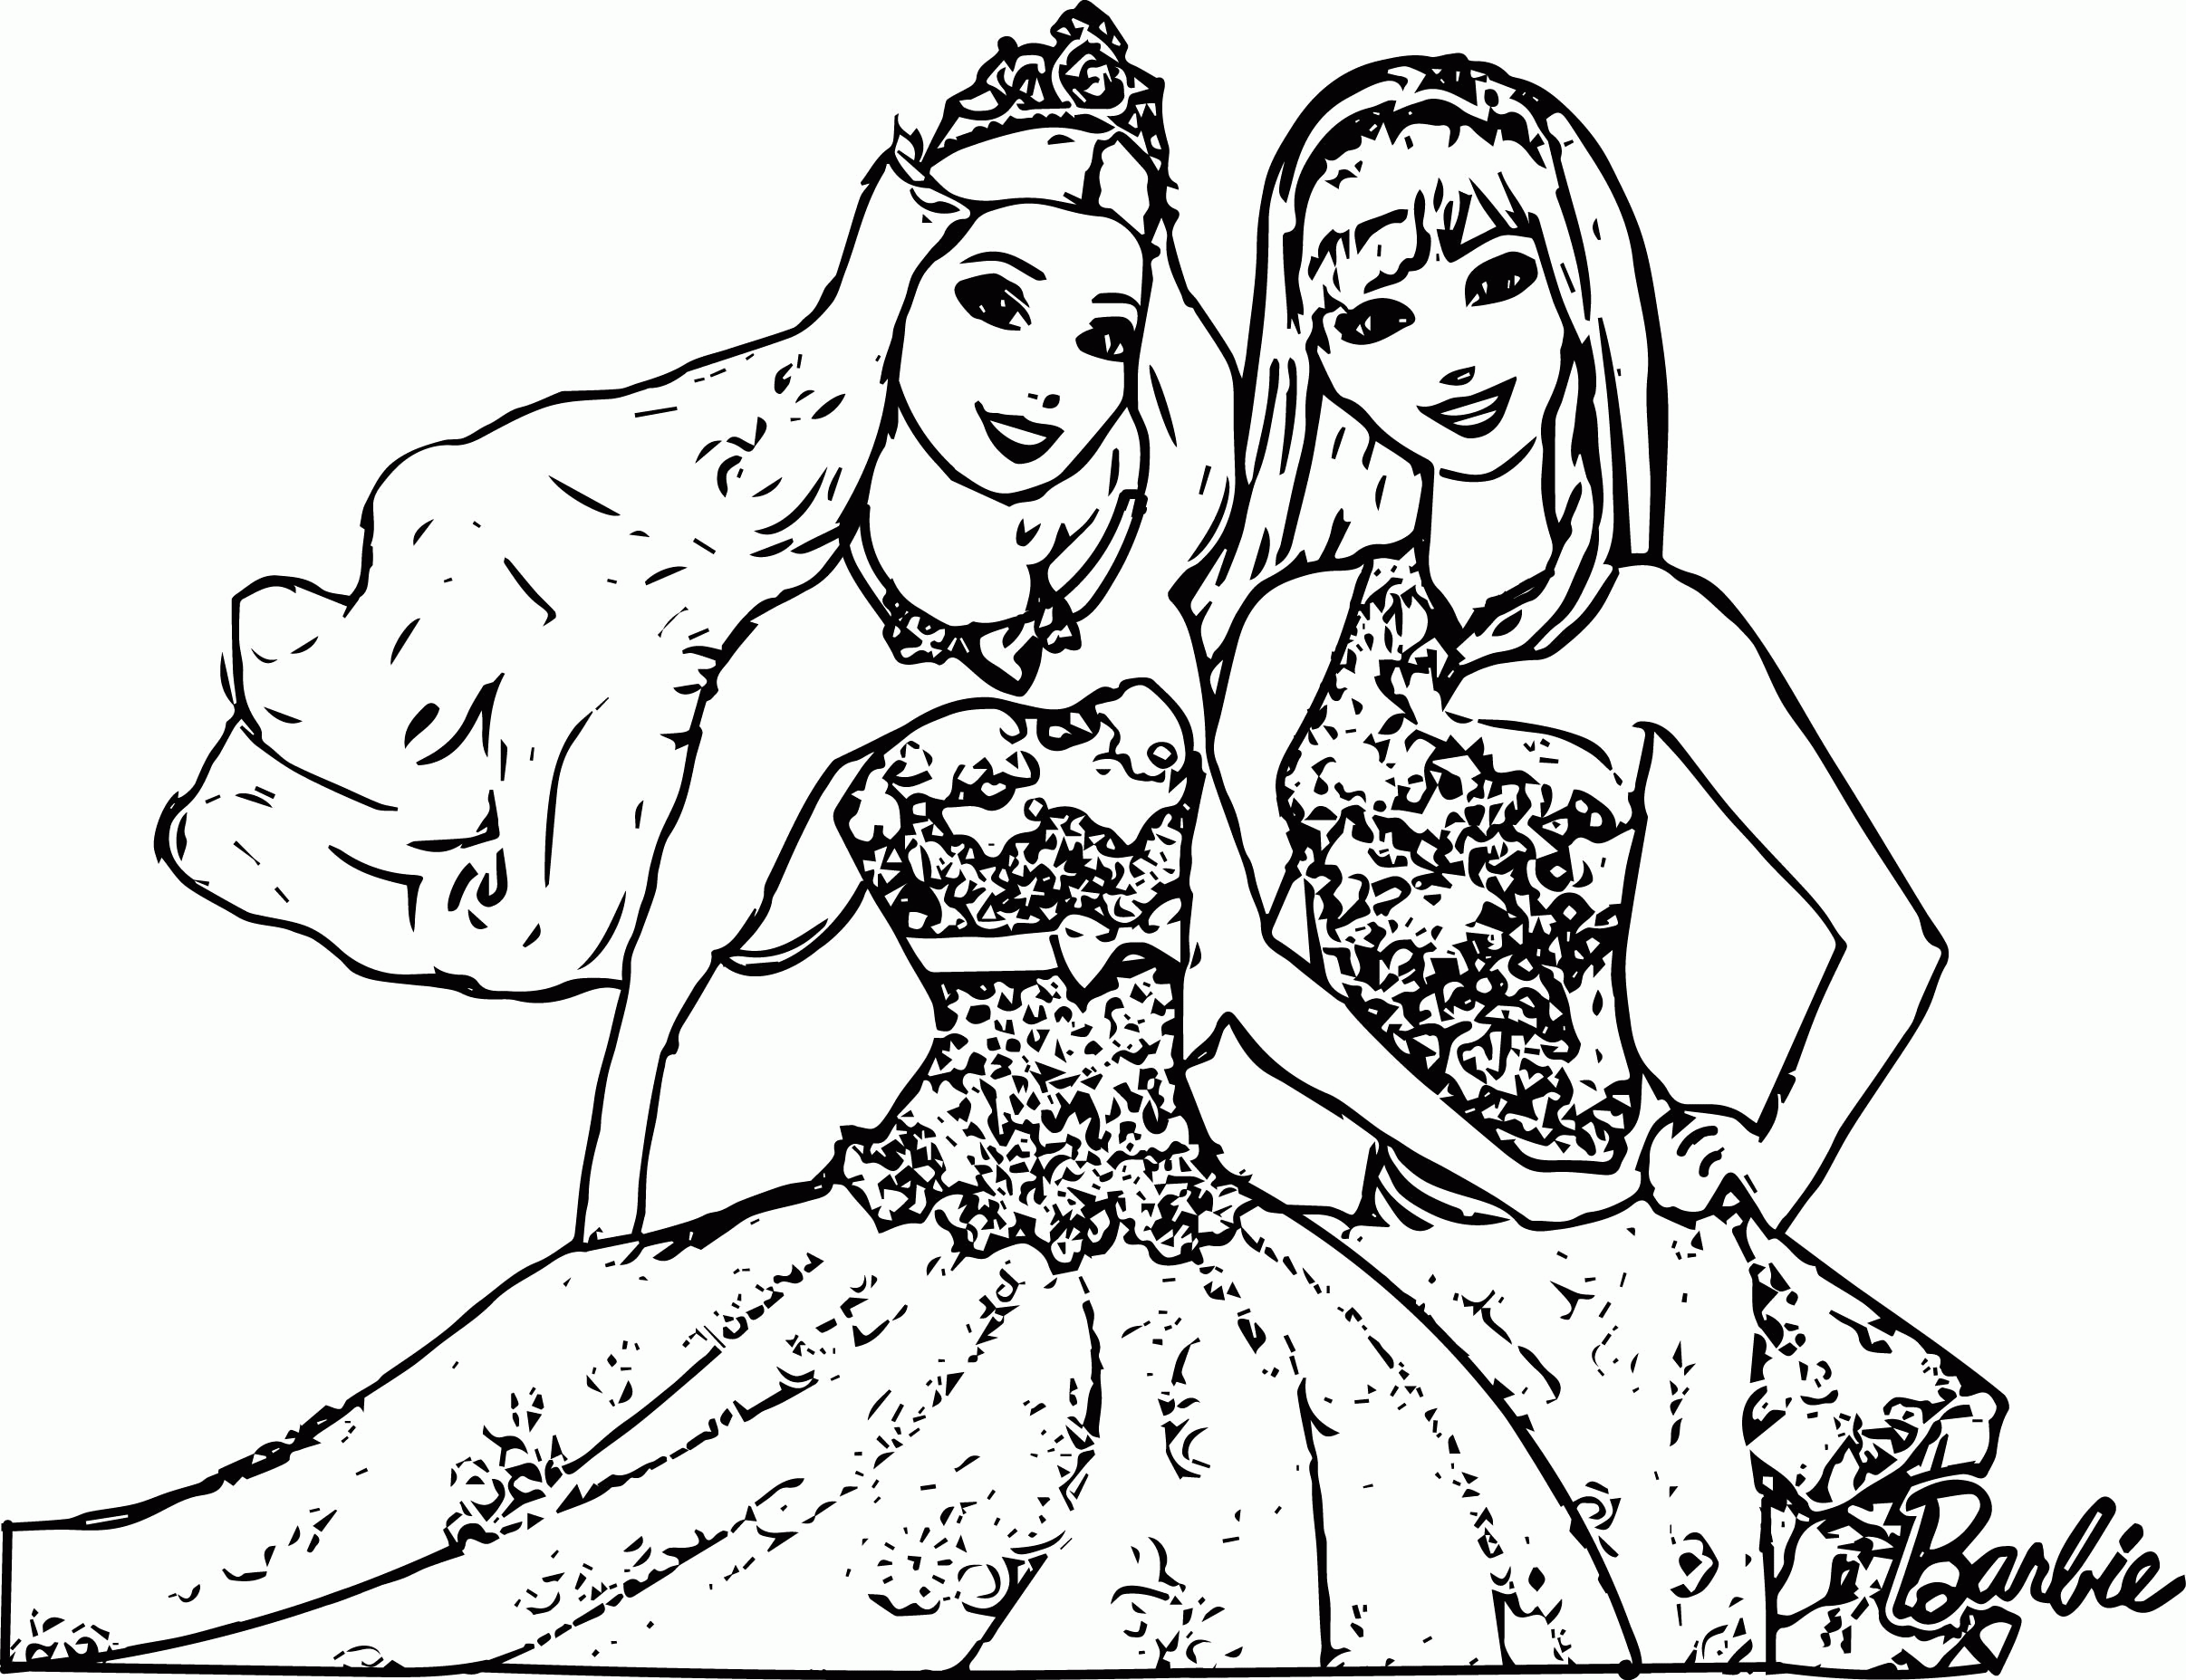 Barbie_the_princess_and_the_popstar_coloring_page_2 | Wecoloringpage